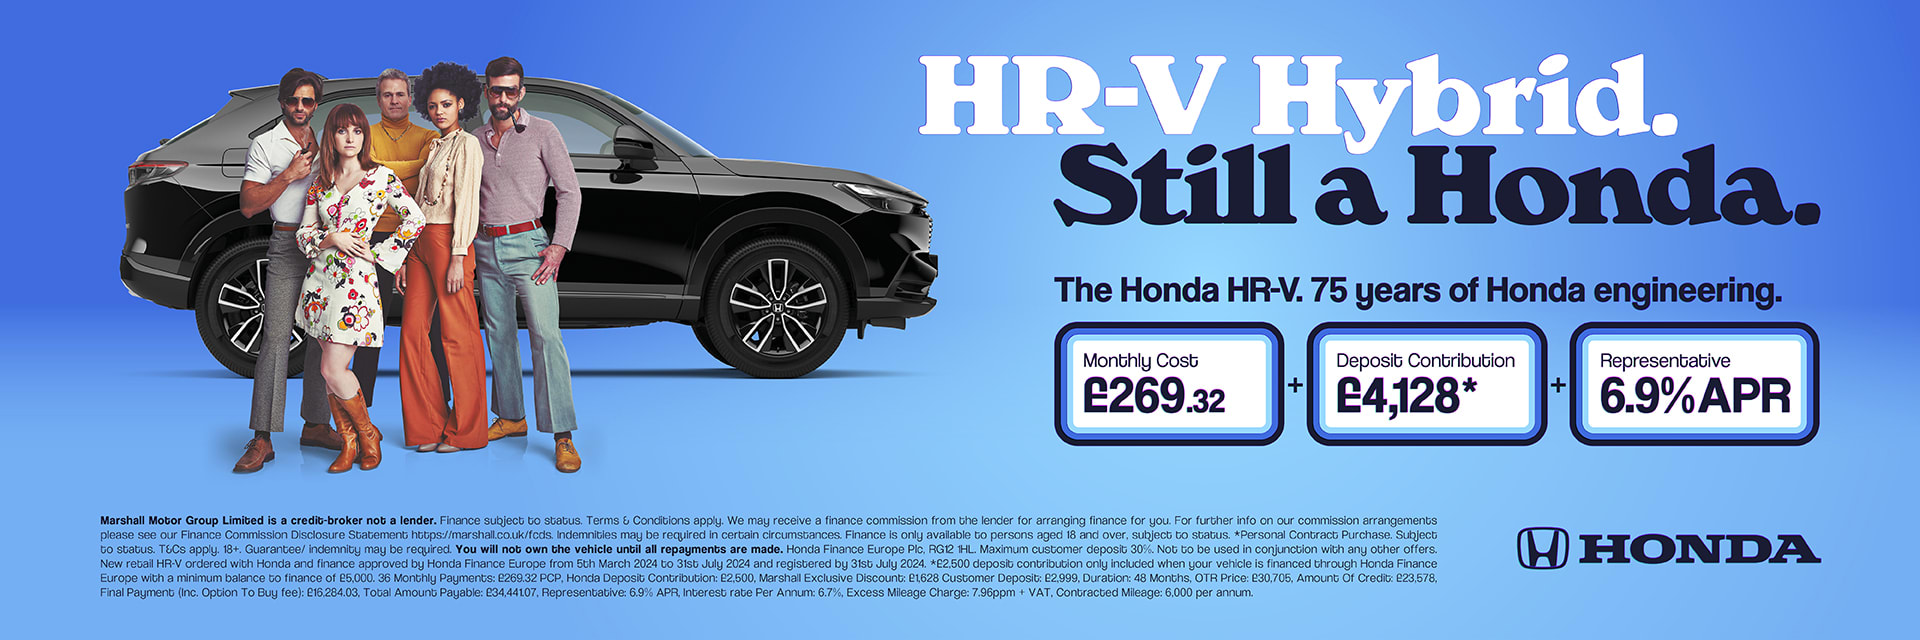 HONDA HR-V PERSONAL CONTRACT PURCHASE OFFER